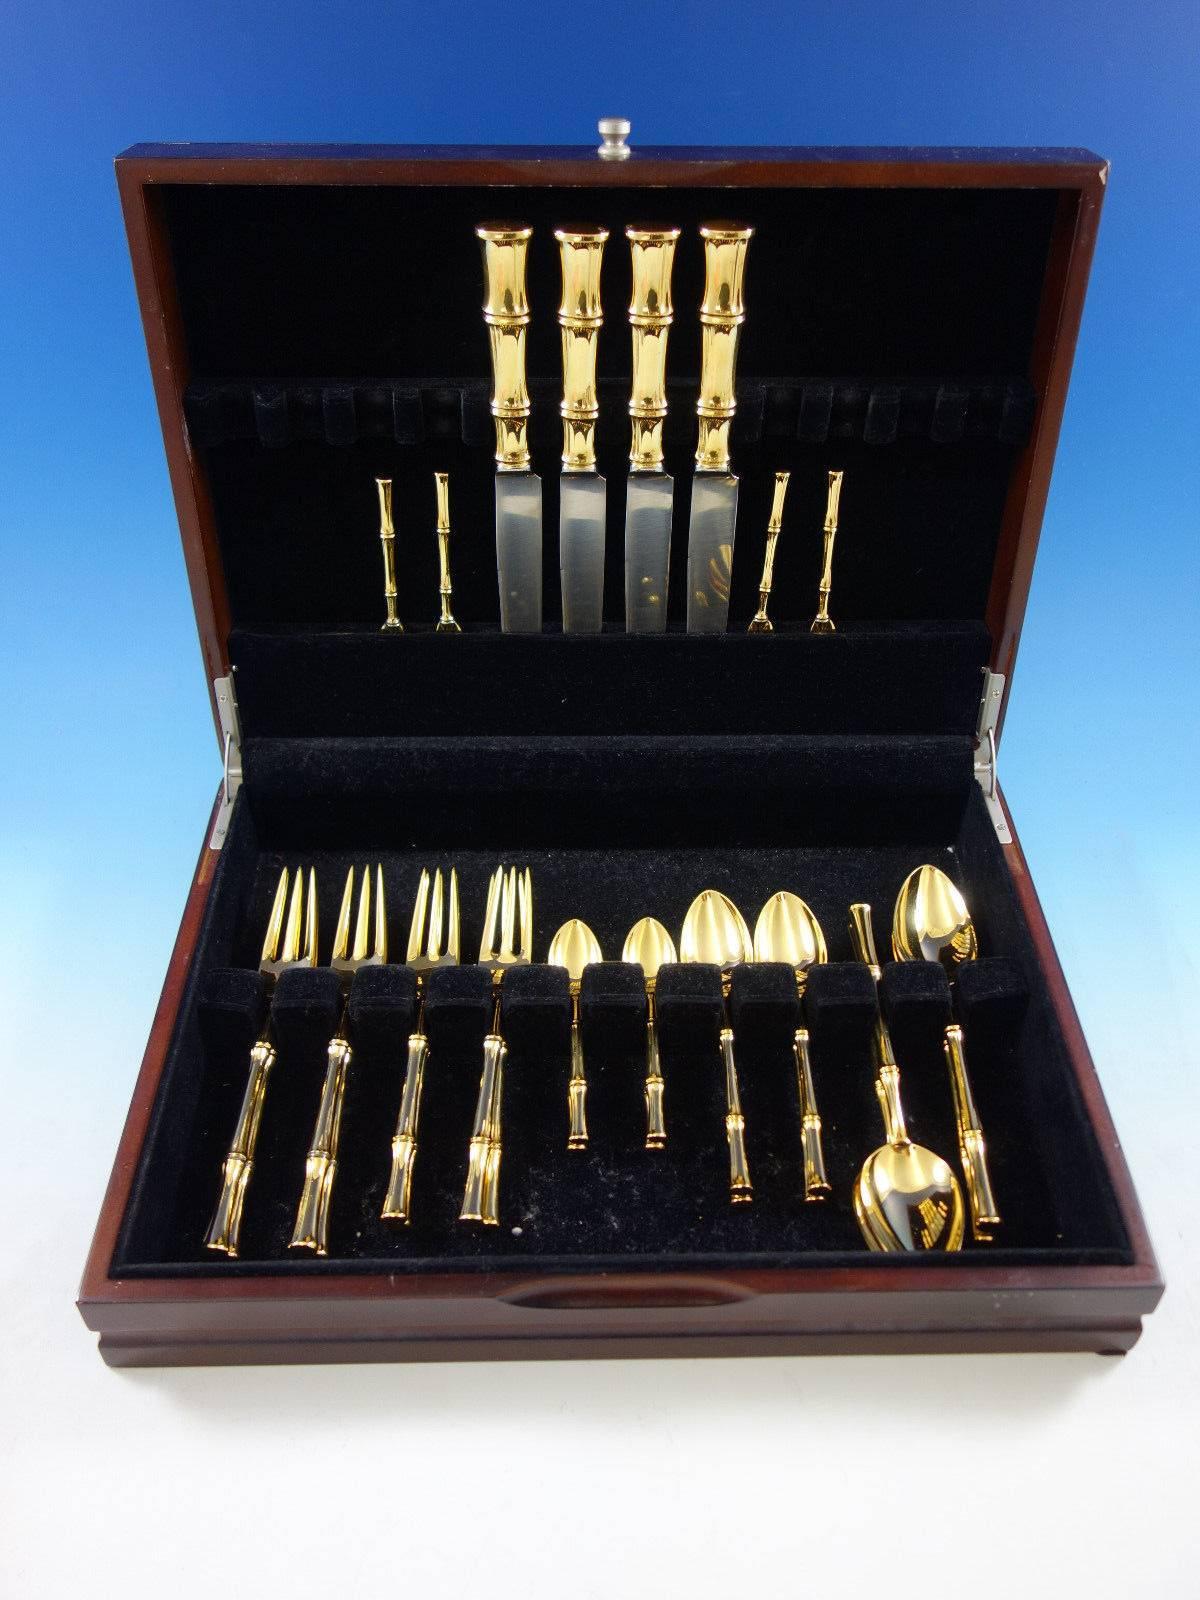 Bamboo Vermeil (completely gold-washed) by Tiffany & Co. sterling silver flatware set of 28 pieces. Great starter set! This set includes: Four dinner size knives, 9 1/2